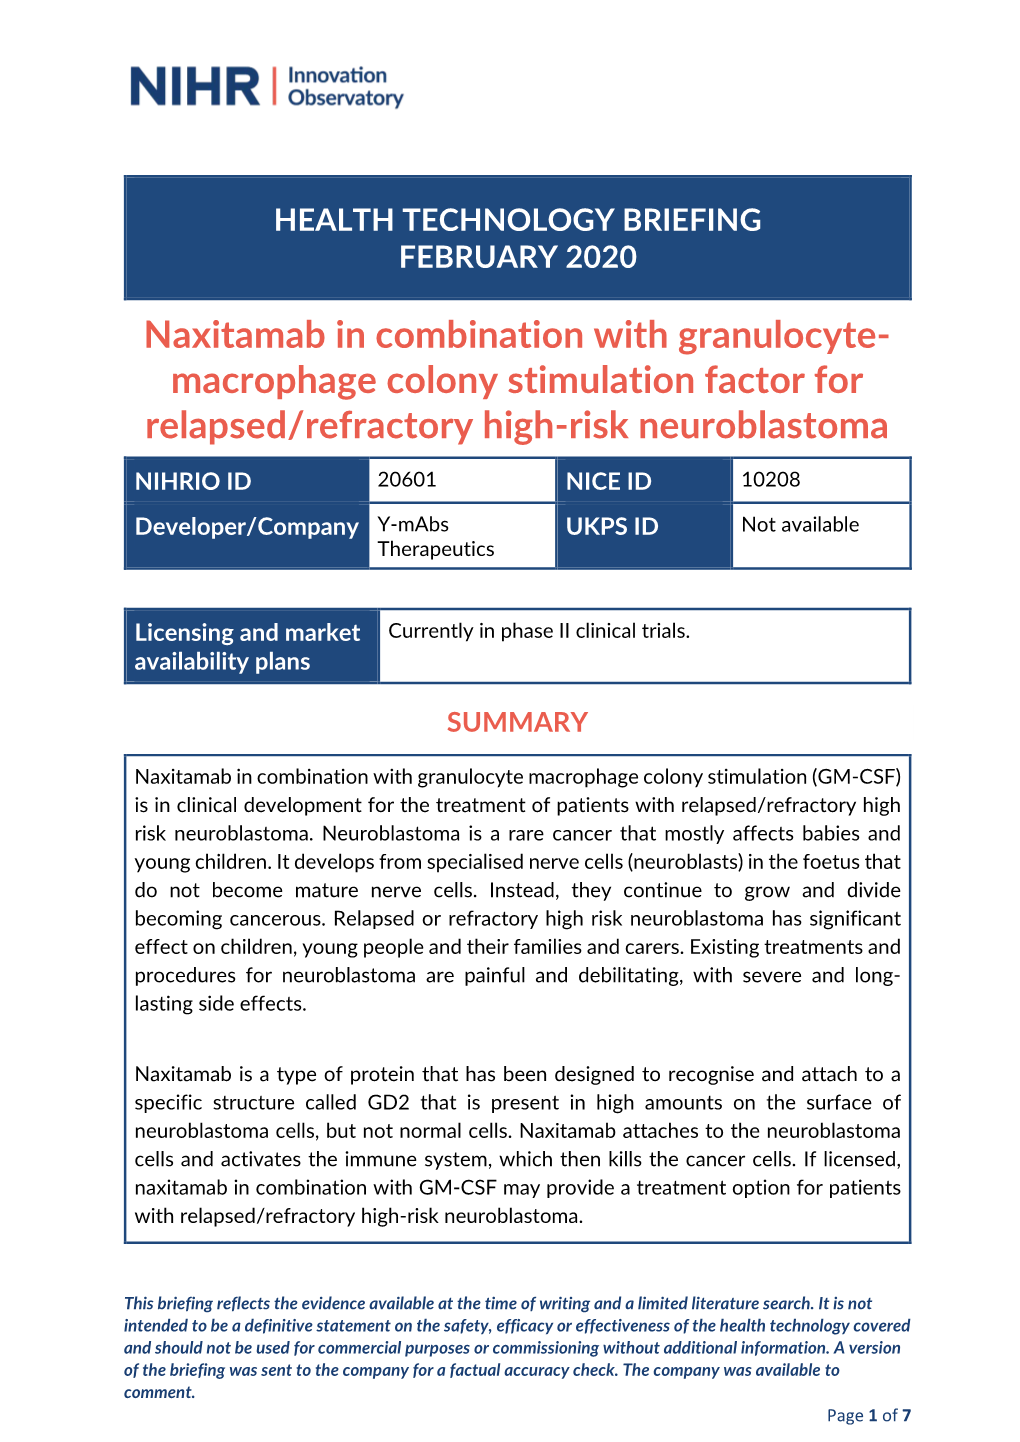 Macrophage Colony Stimulation Factor for Relapsed/Refractory High-Risk Neuroblastoma